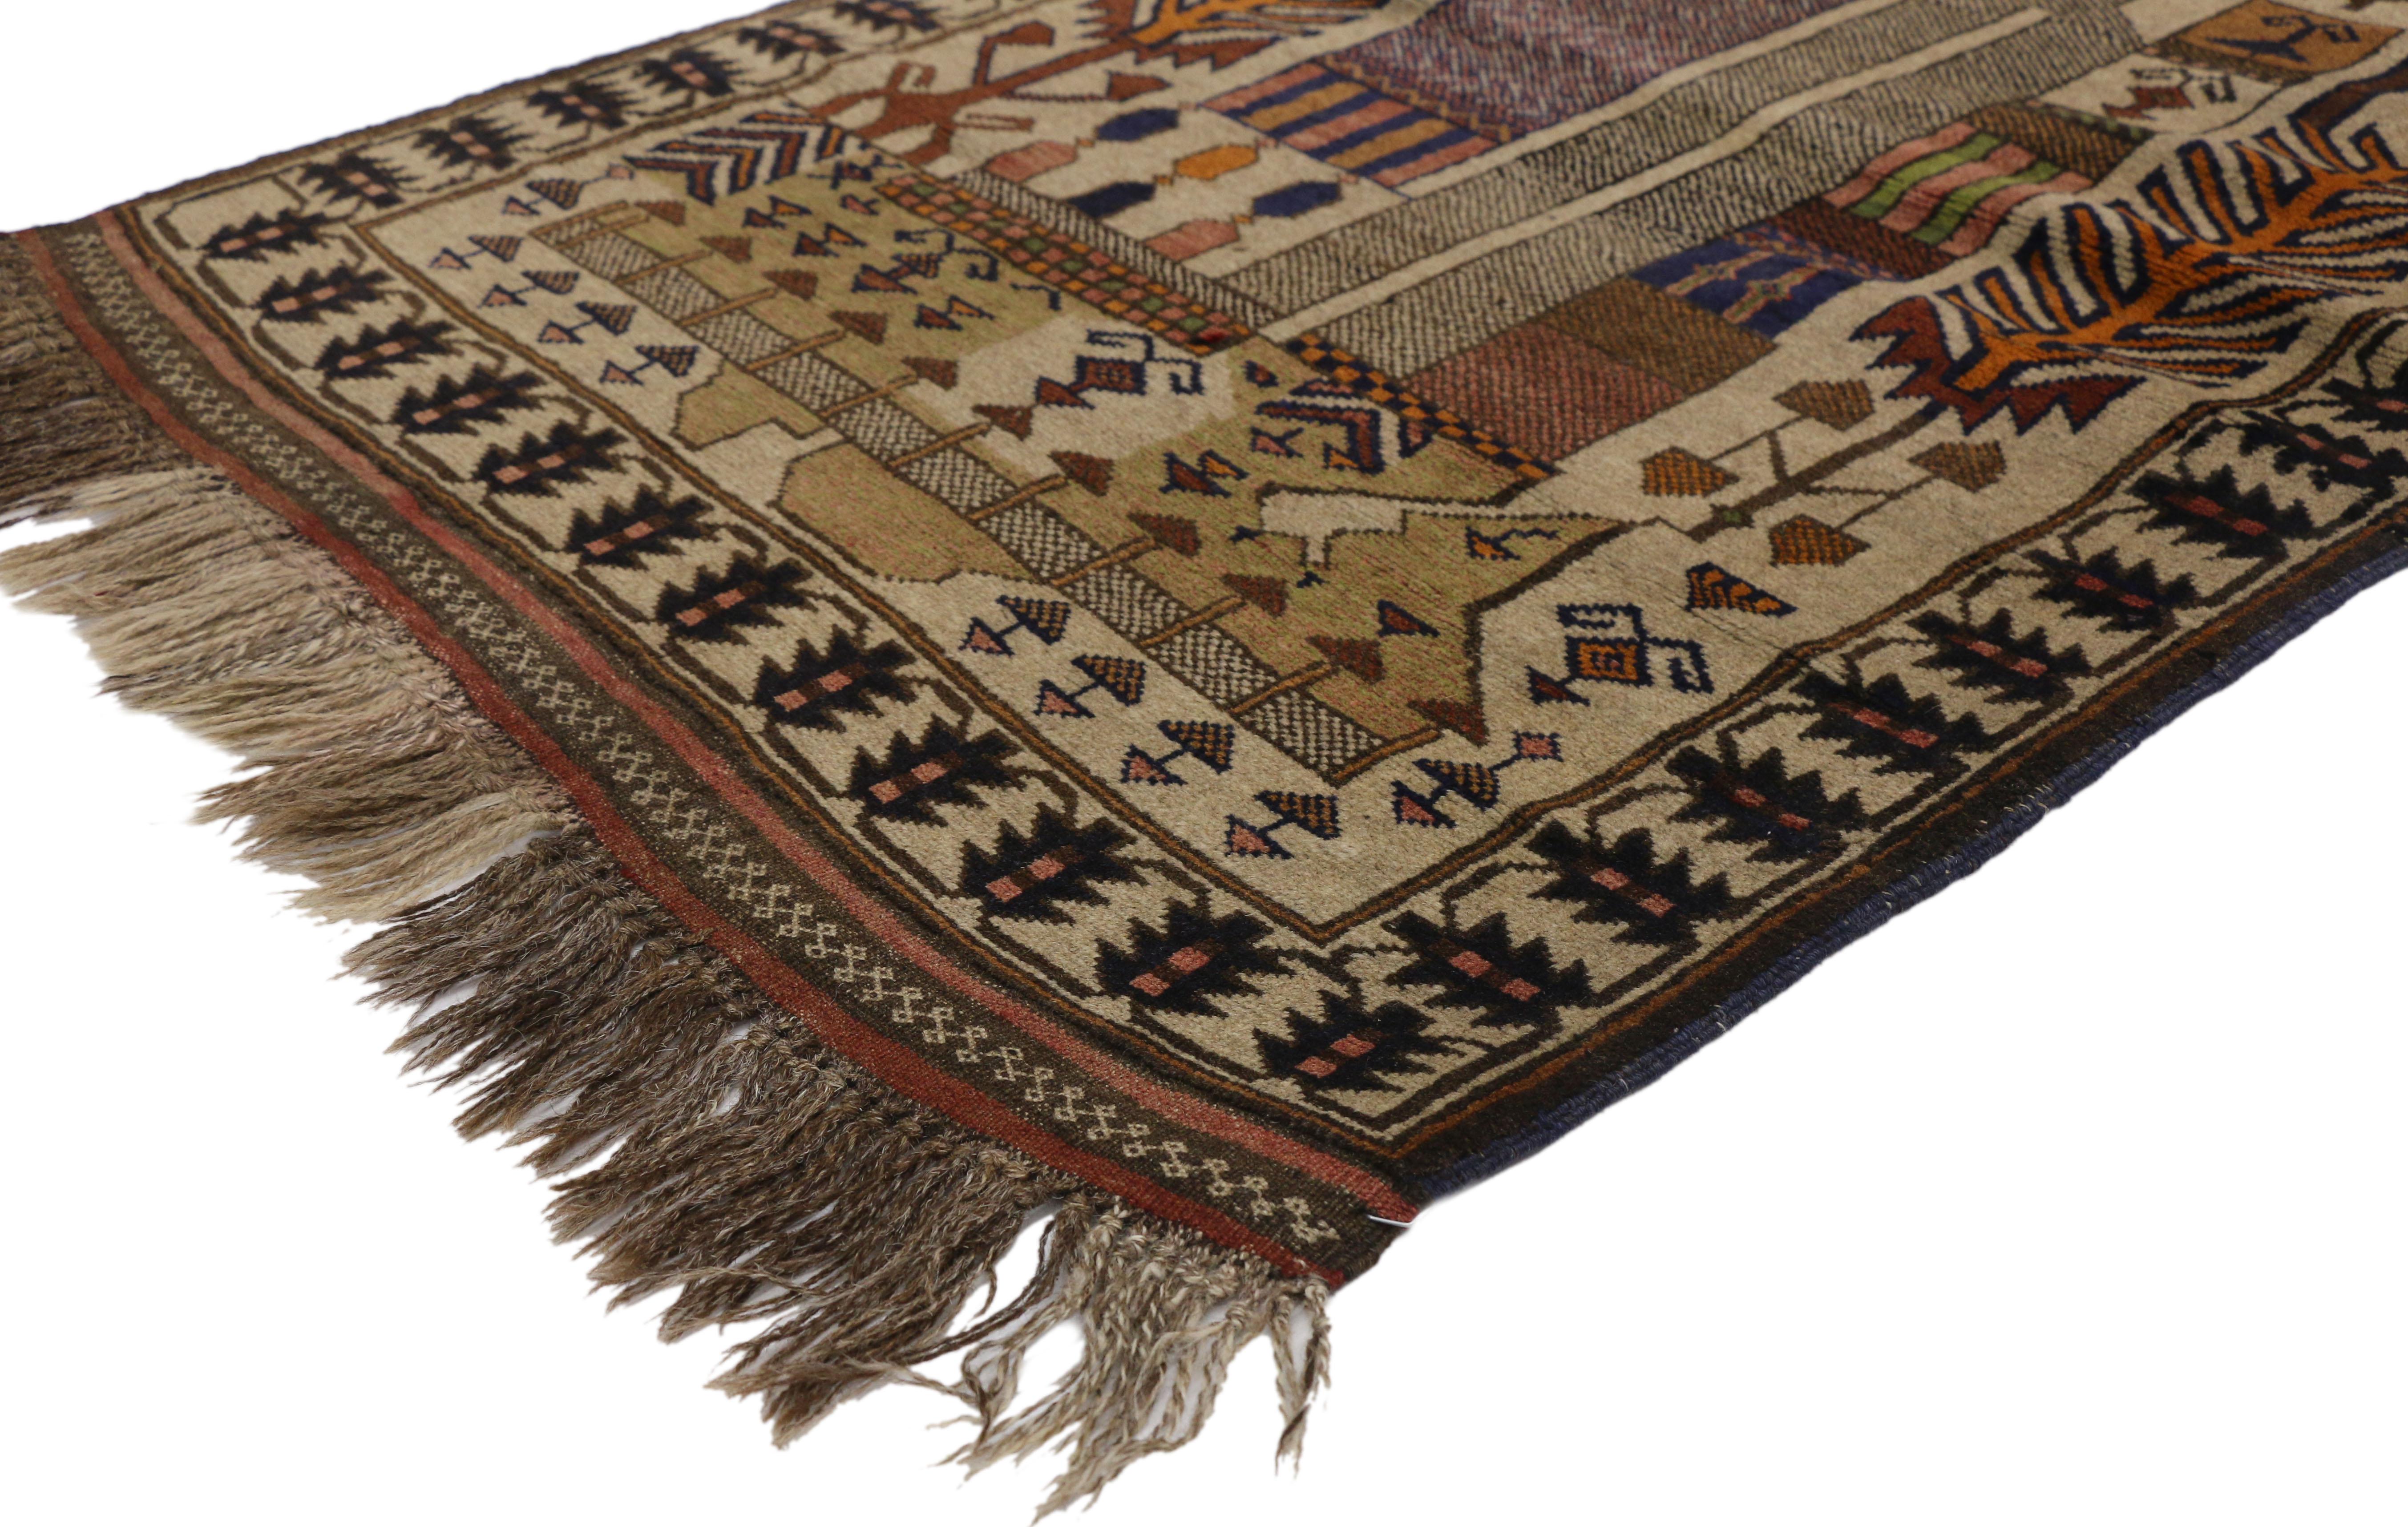 74665, vintage Afghan Balouch War rug with Tribal Nomadic style. This hand knotted wool vintage Afghan Balouch War rug possibly depicts a scene of the Minaret of Jam surrounded by geometric motifs possibly representing land mines, grenades, mines,